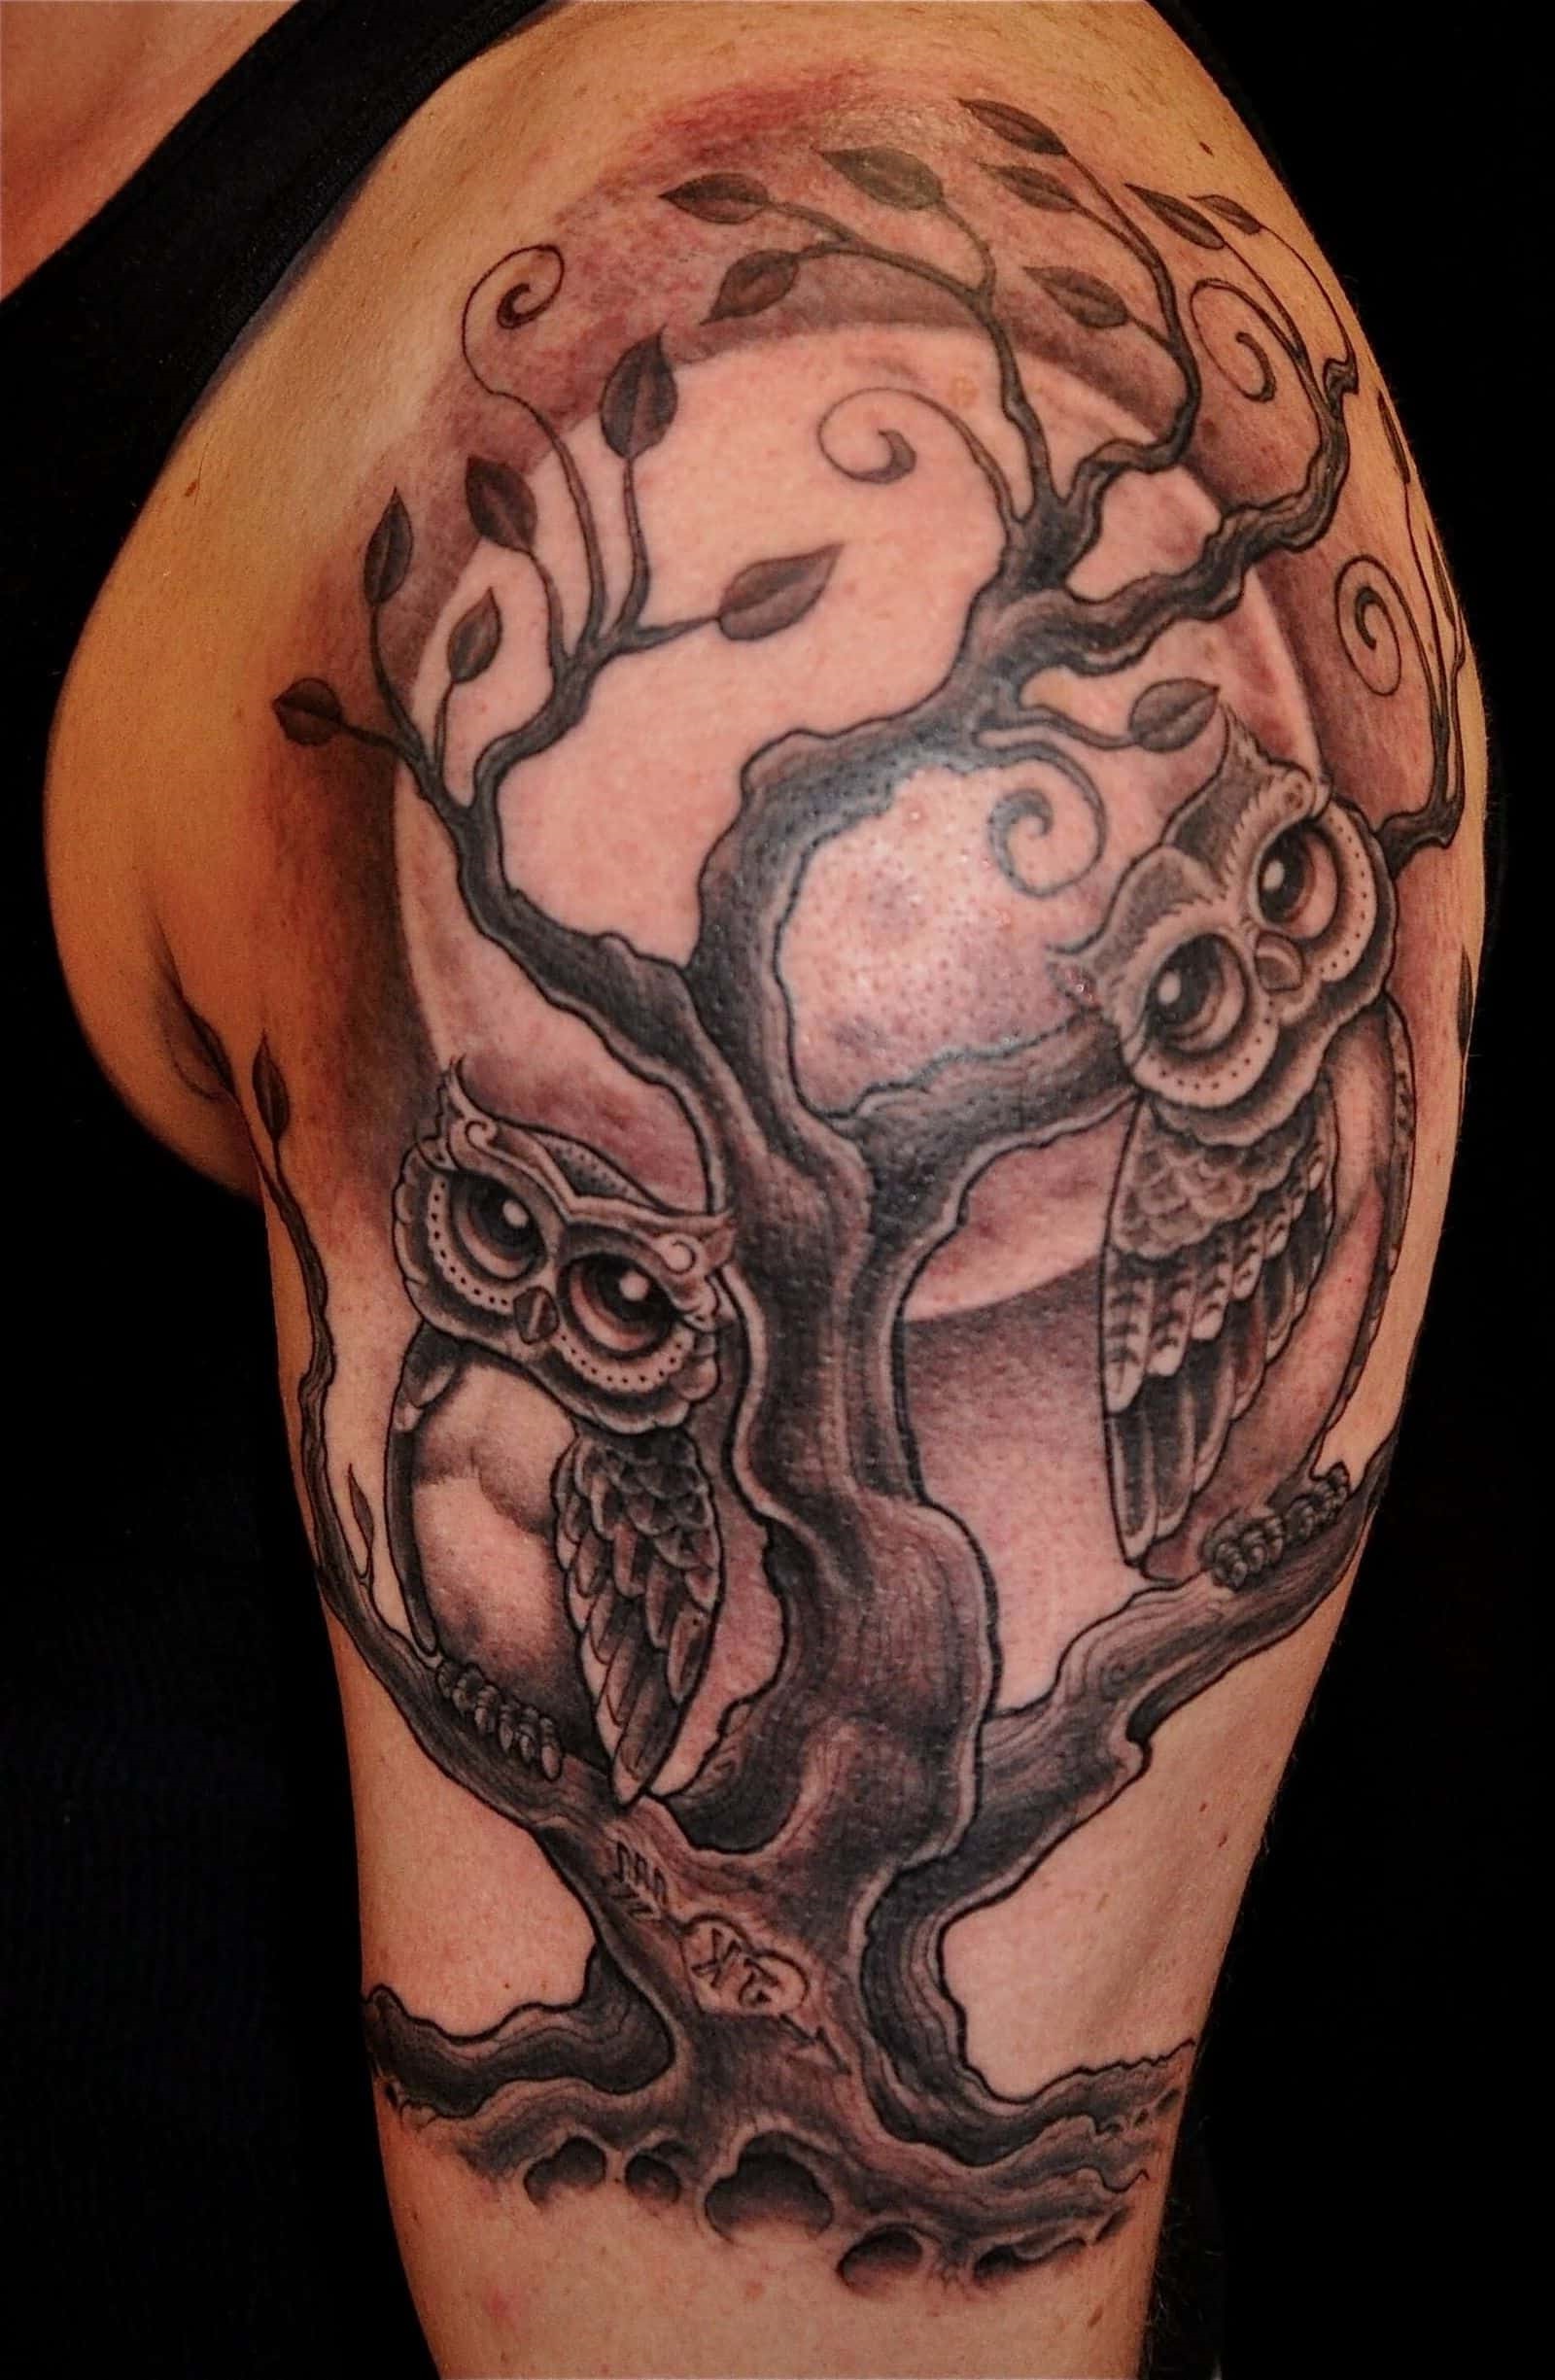 Tattoo arbre exceptionnel.